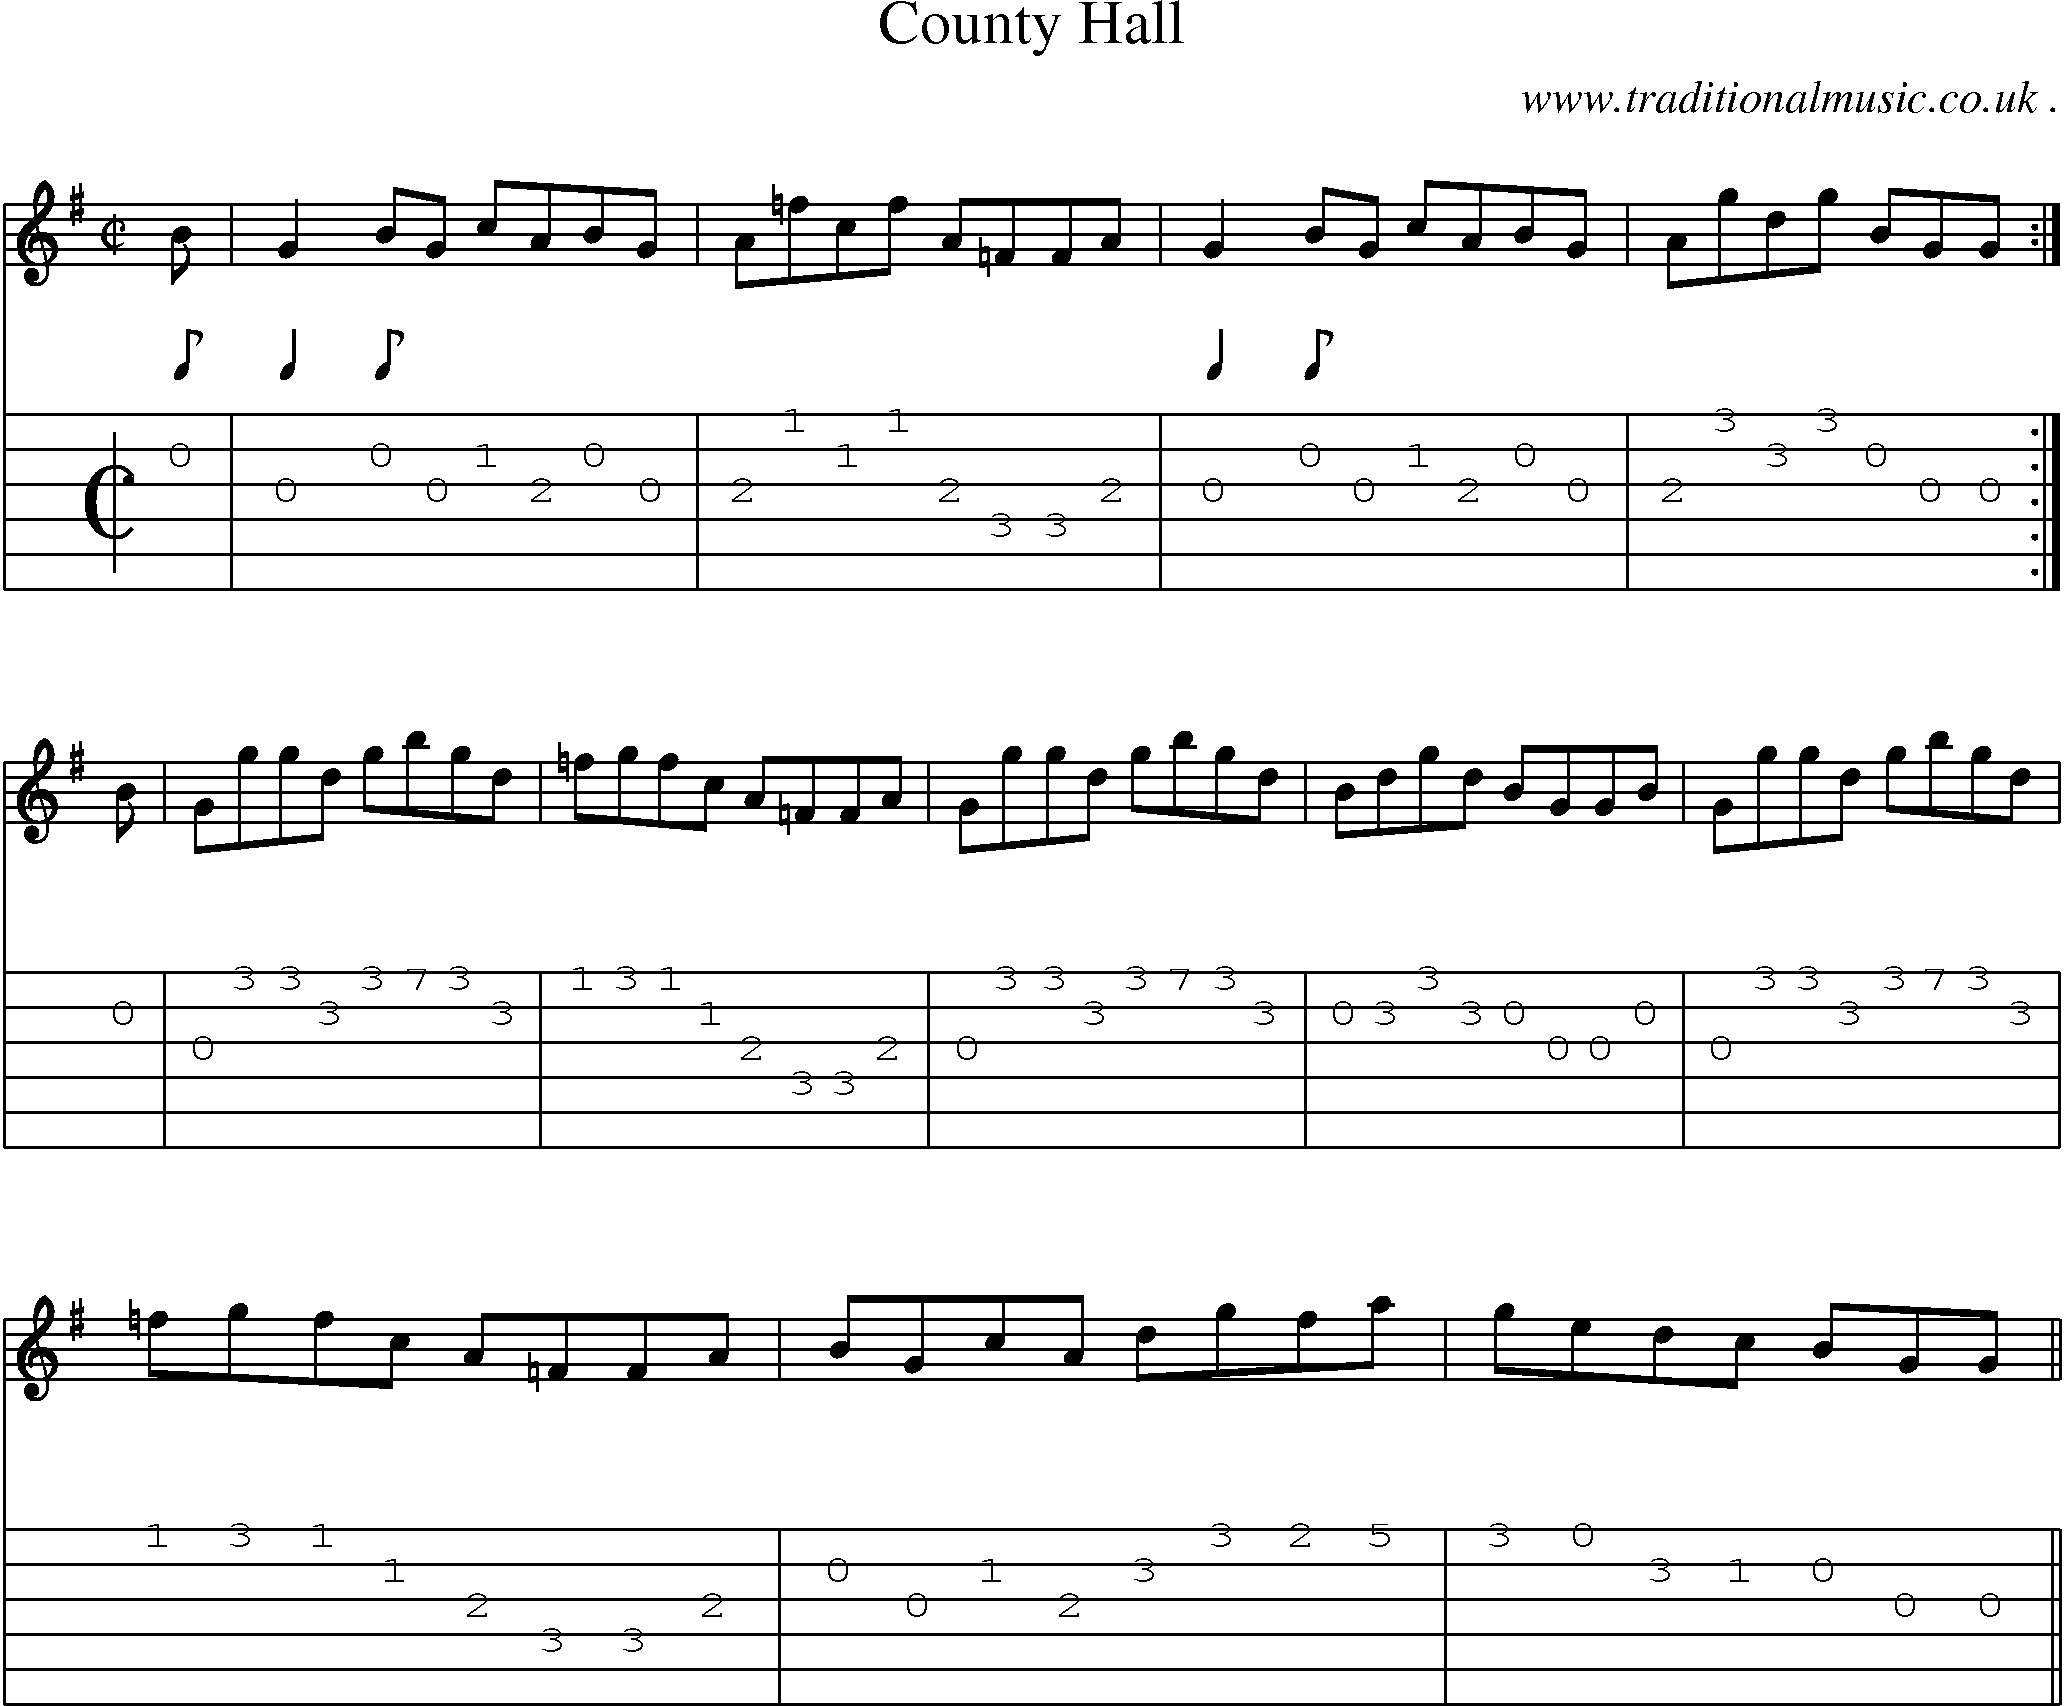 Sheet-music  score, Chords and Guitar Tabs for County Hall